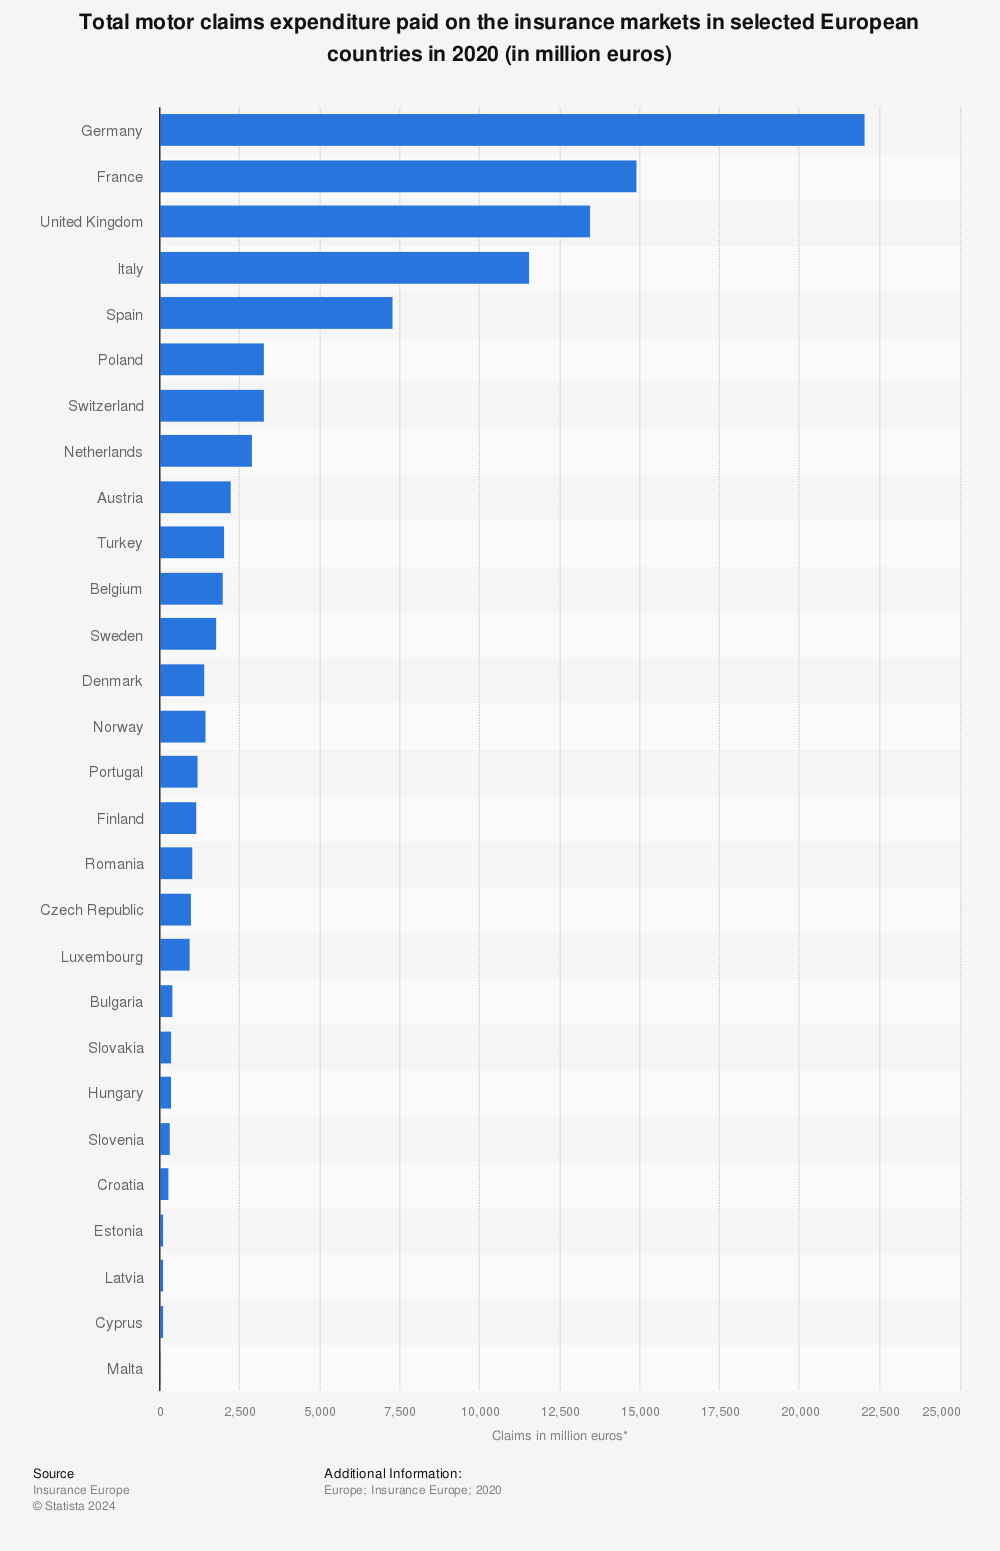 Statistic: Total motor claims expenditure paid on the insurance markets in selected European countries in 2020 (in million euros) | Statista